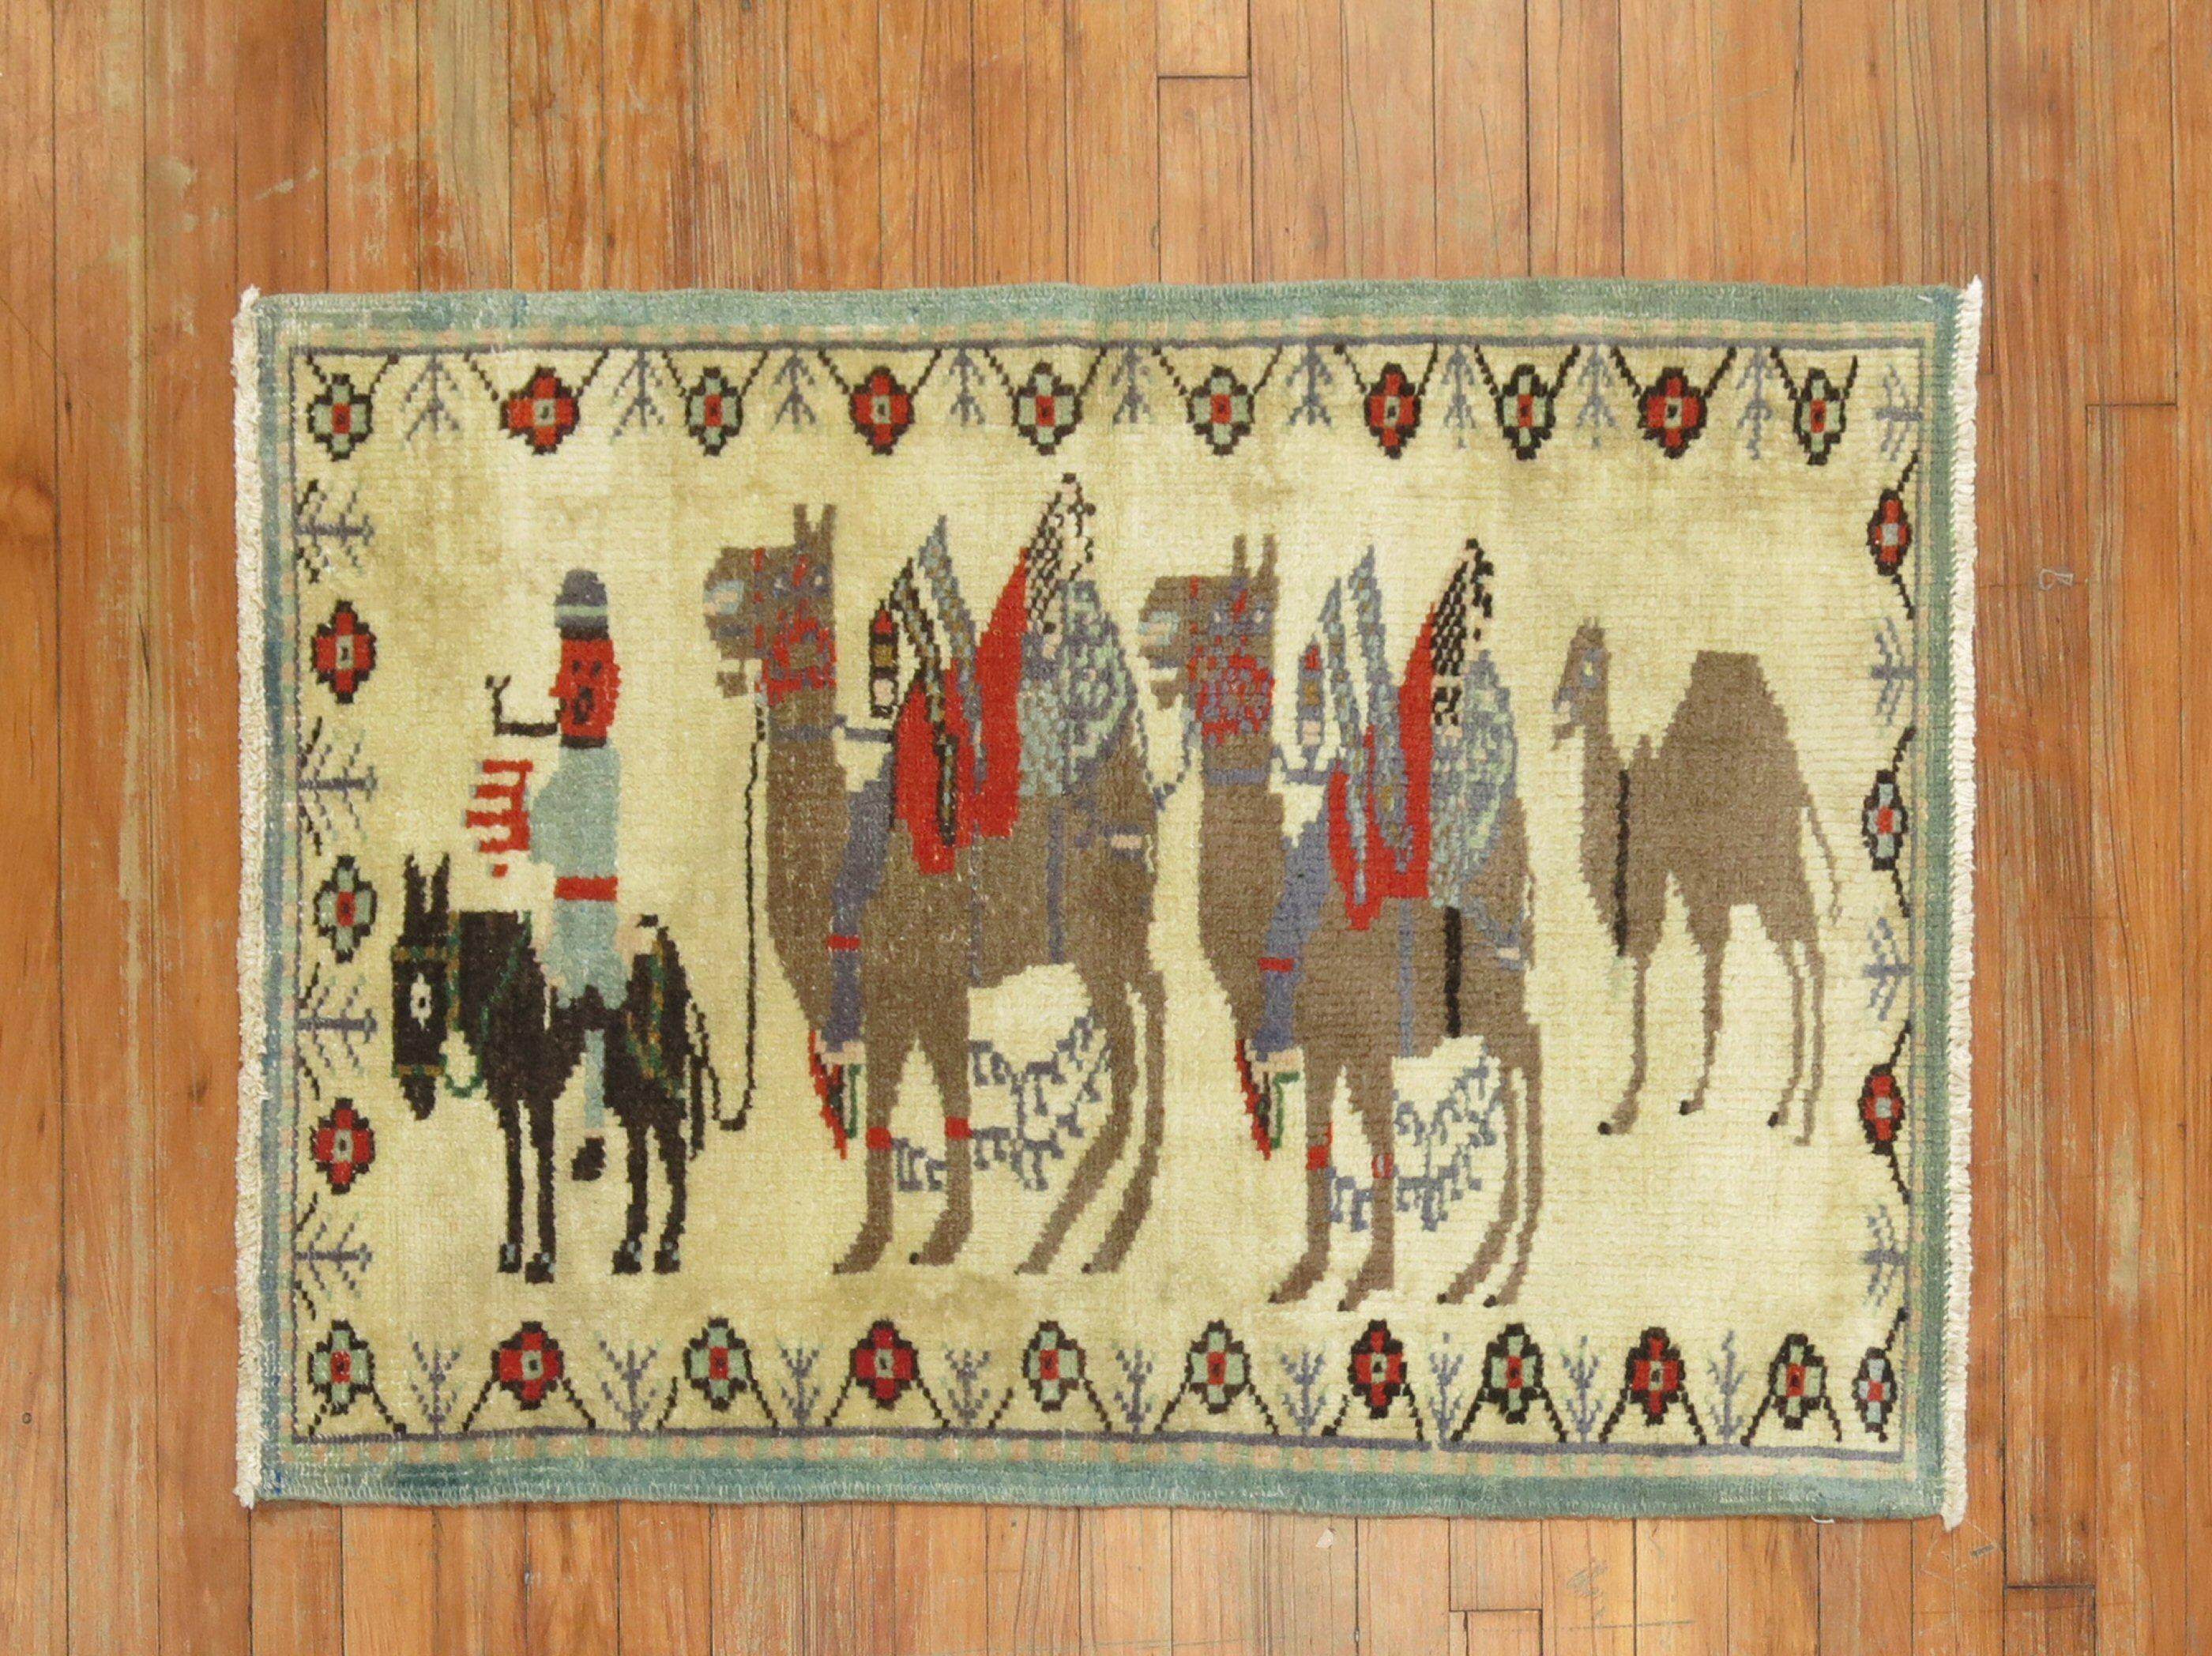 A mid 20th century hand-knotted Turkish Rug with 3 brown camels hooked on a small black horse and a human figure

Details
rug no.	31332
size	2' 5